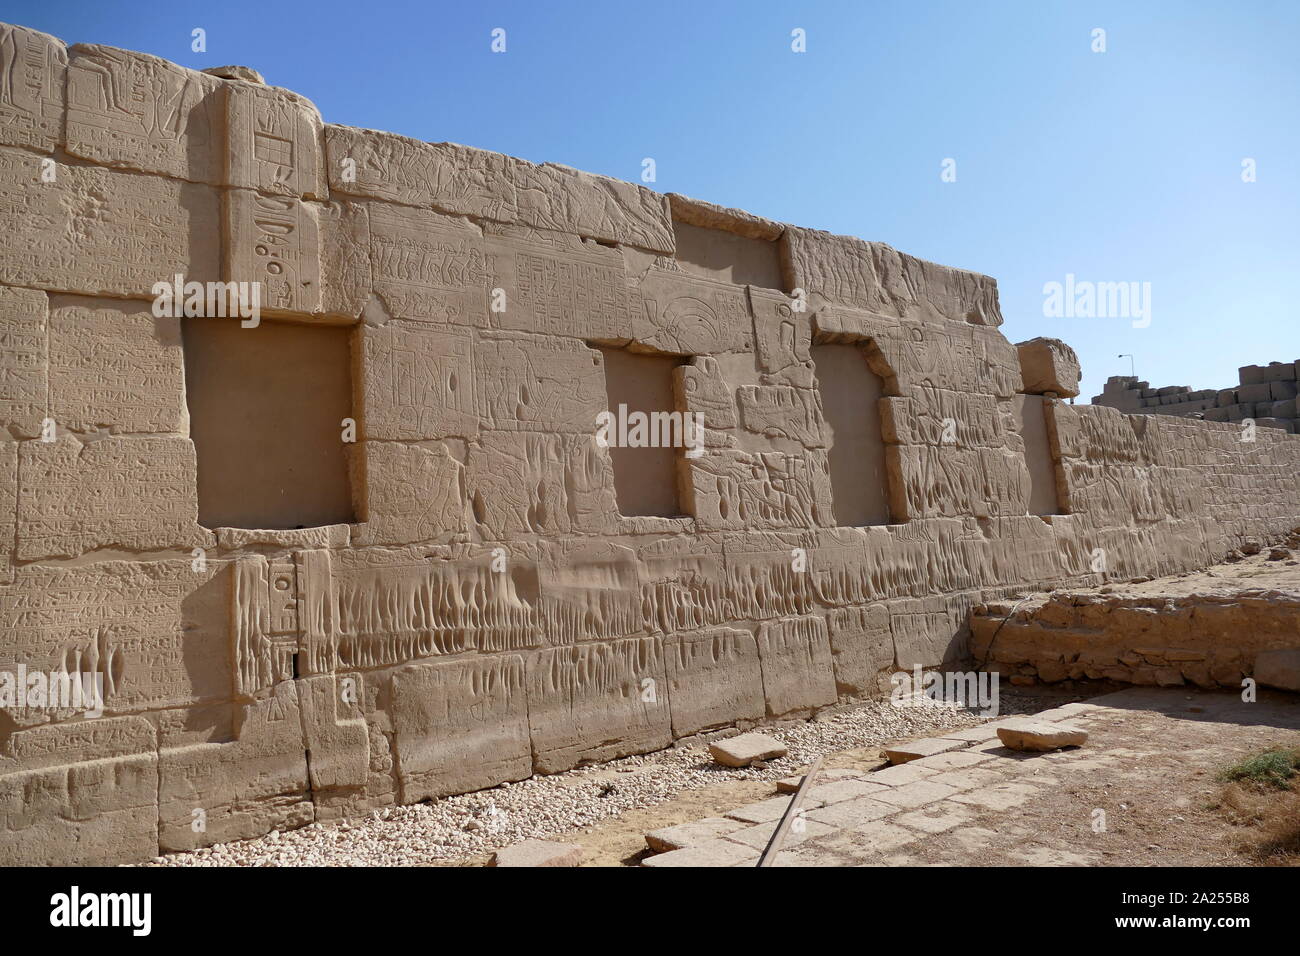 Carved relief at Karnak Temple Complex, in Luxor, Egypt. Construction at the complex began during the reign of Senusret I in the Middle Kingdom and continued into the Ptolemaic period, although most of the extant buildings date from the New Kingdom. The area around Karnak was the main place of worship of the eighteenth dynasty Theban Triad with the god Amun as its head. It is part of the monumental city of Thebes. Stock Photo